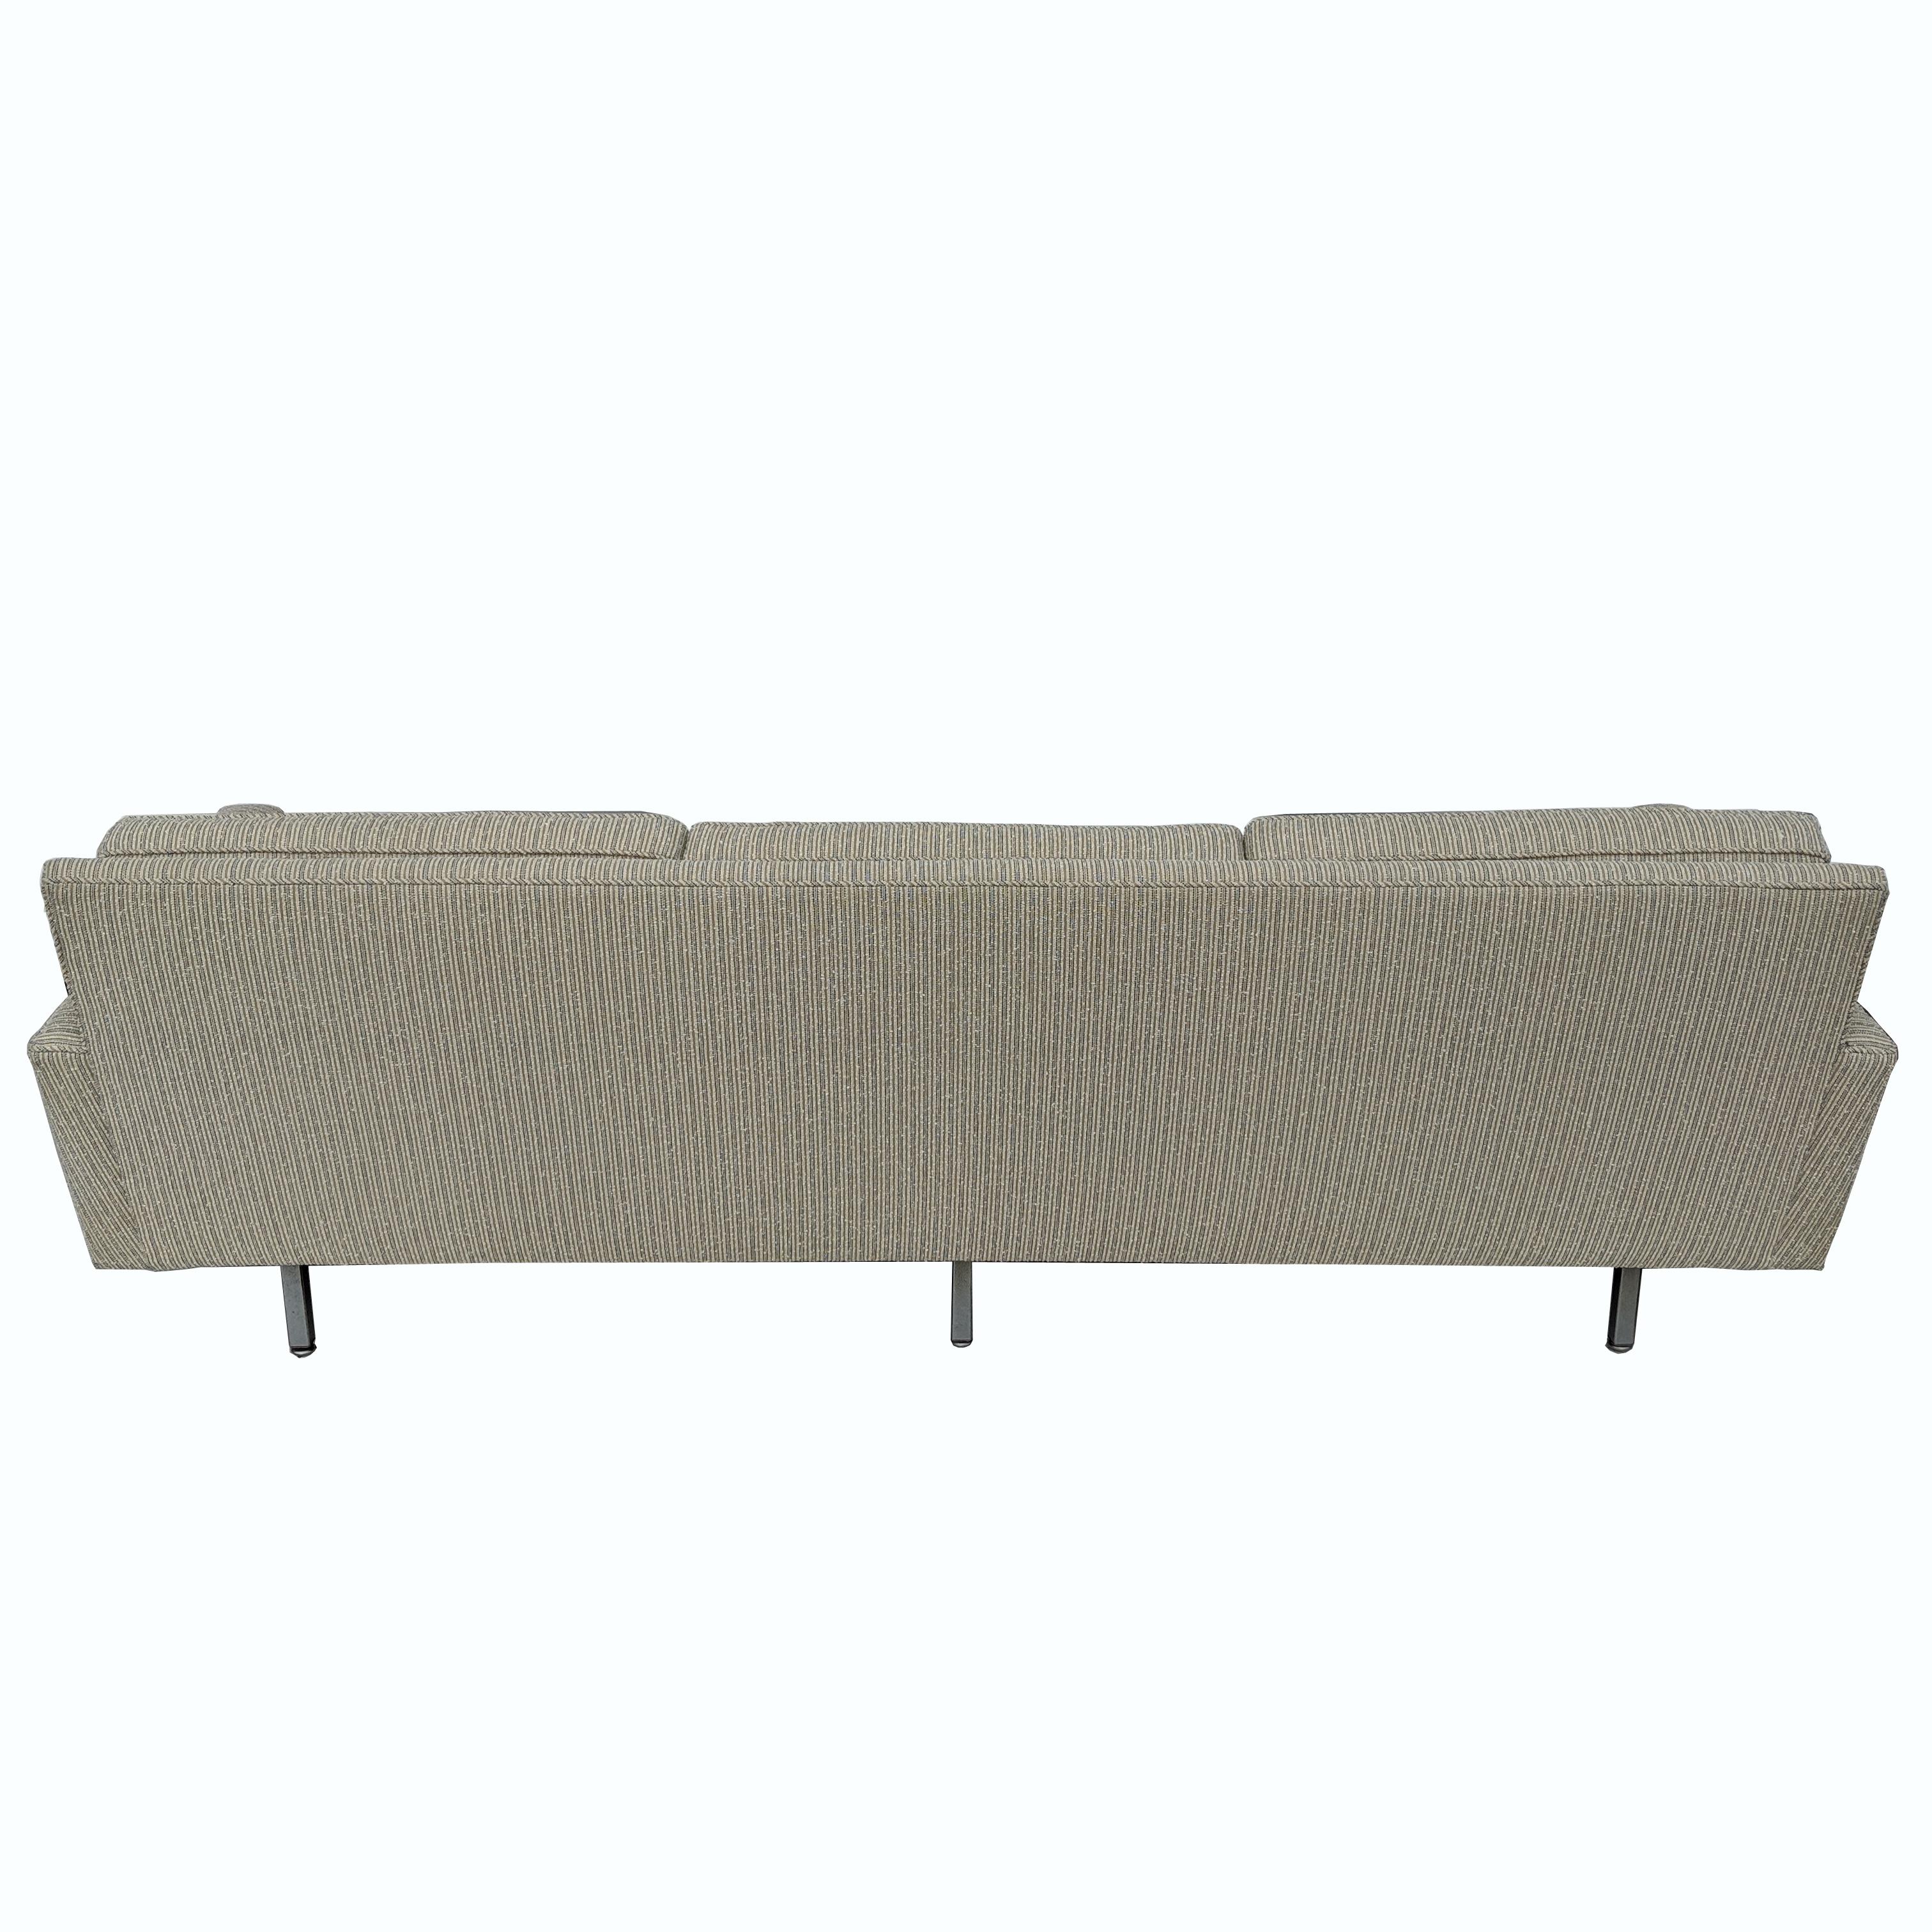 American Restored George Nelson Sofa For Sale